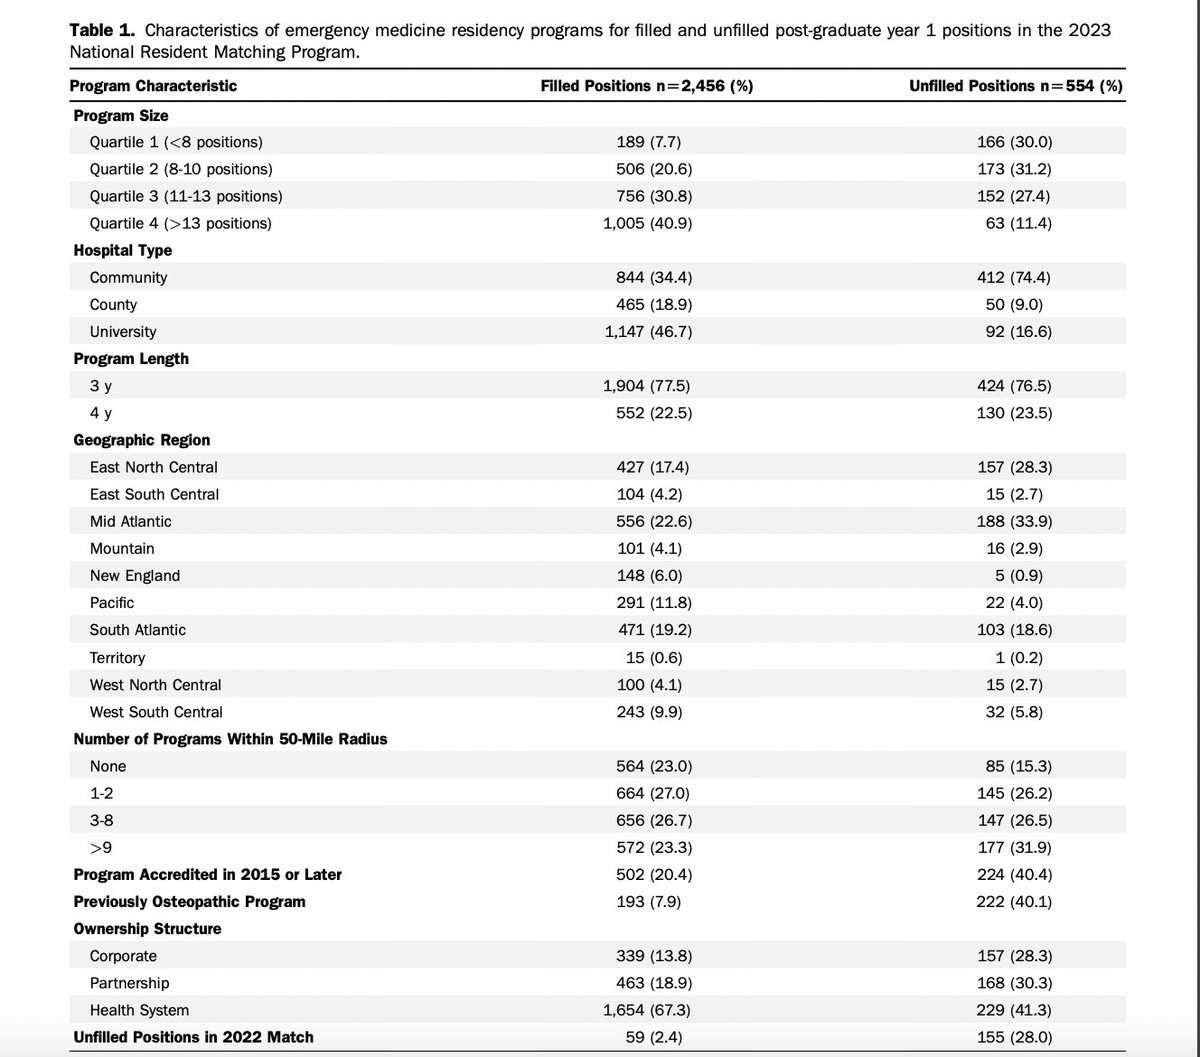 Hot off the Press: Characteristics of Emergency Medicine Residency Programs With Unfilled Positions in the 2023 Match annemergmed.com/article/S0196-…